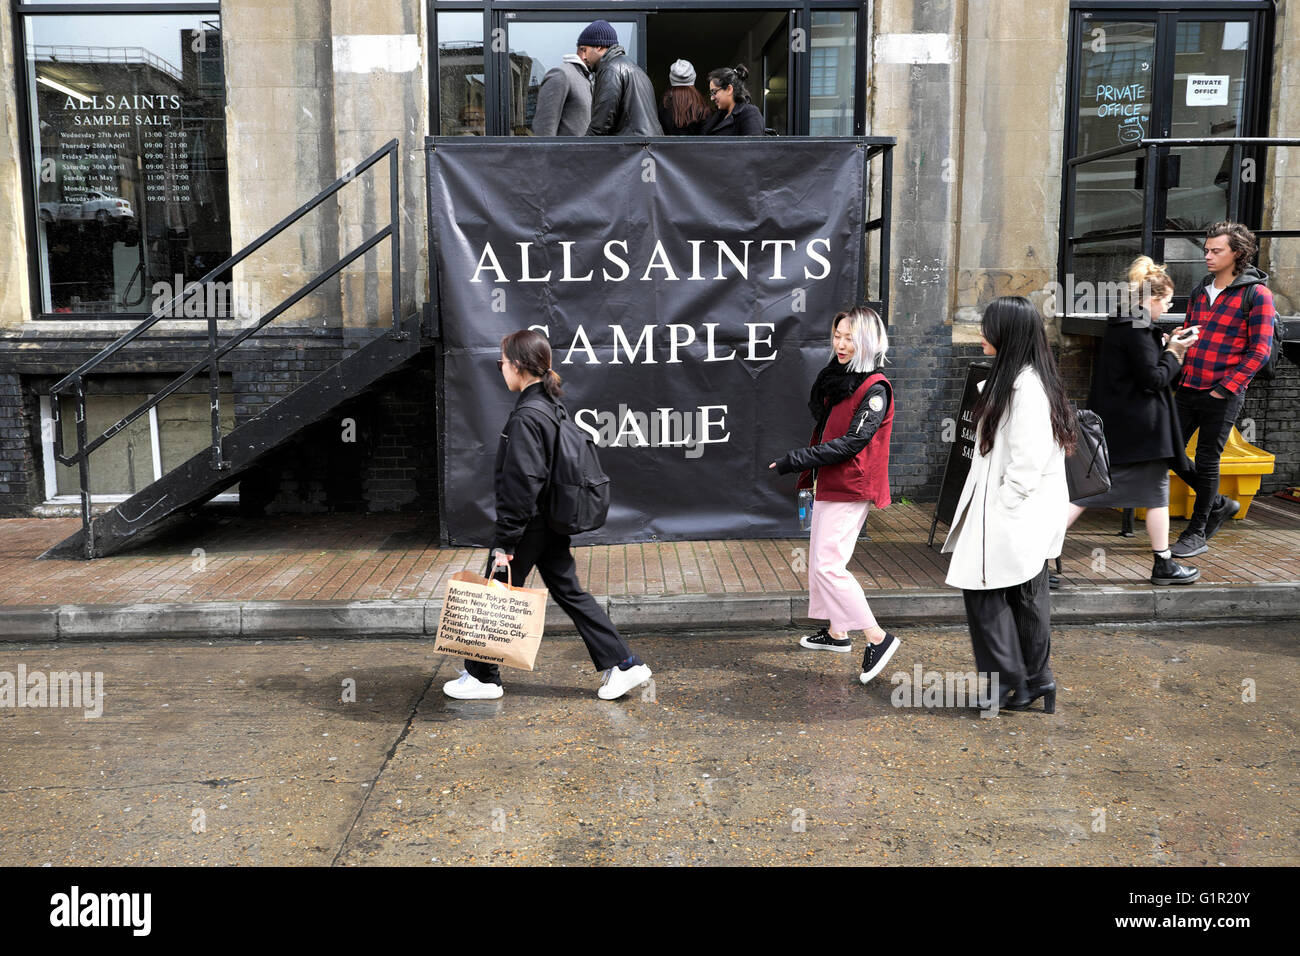 Allsaints Shop High Resolution Stock Photography and Images - Alamy